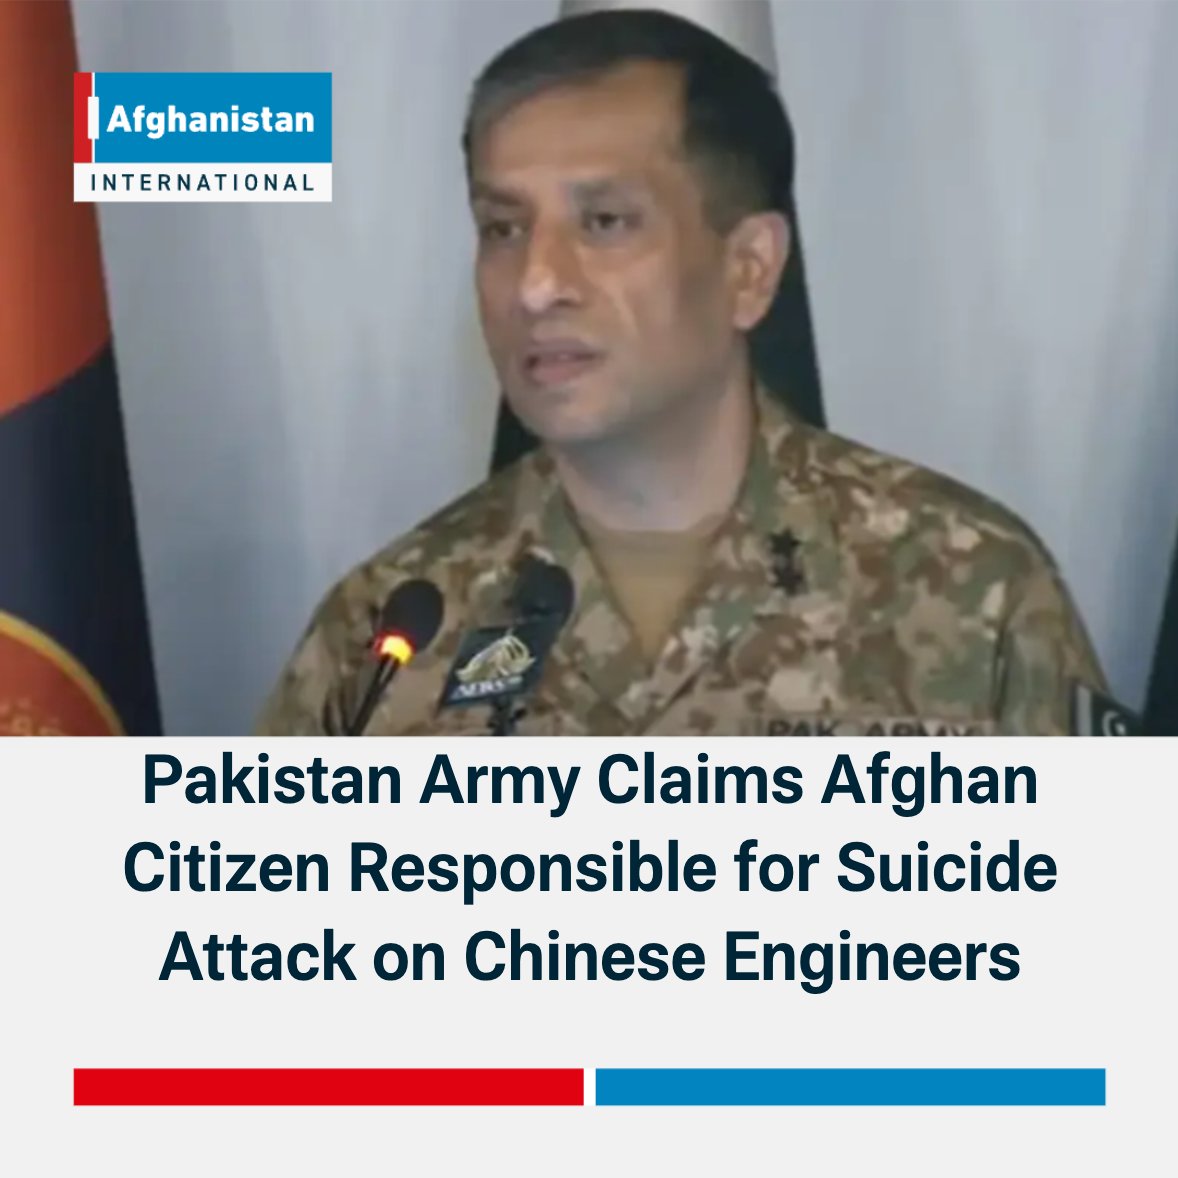 The Pakistan Army has asserted that the suicide attack which killed five Chinese engineers in Khyber Pakhtunkhwa was orchestrated in Afghanistan by an Afghan national. afintl.com/en/202405073805